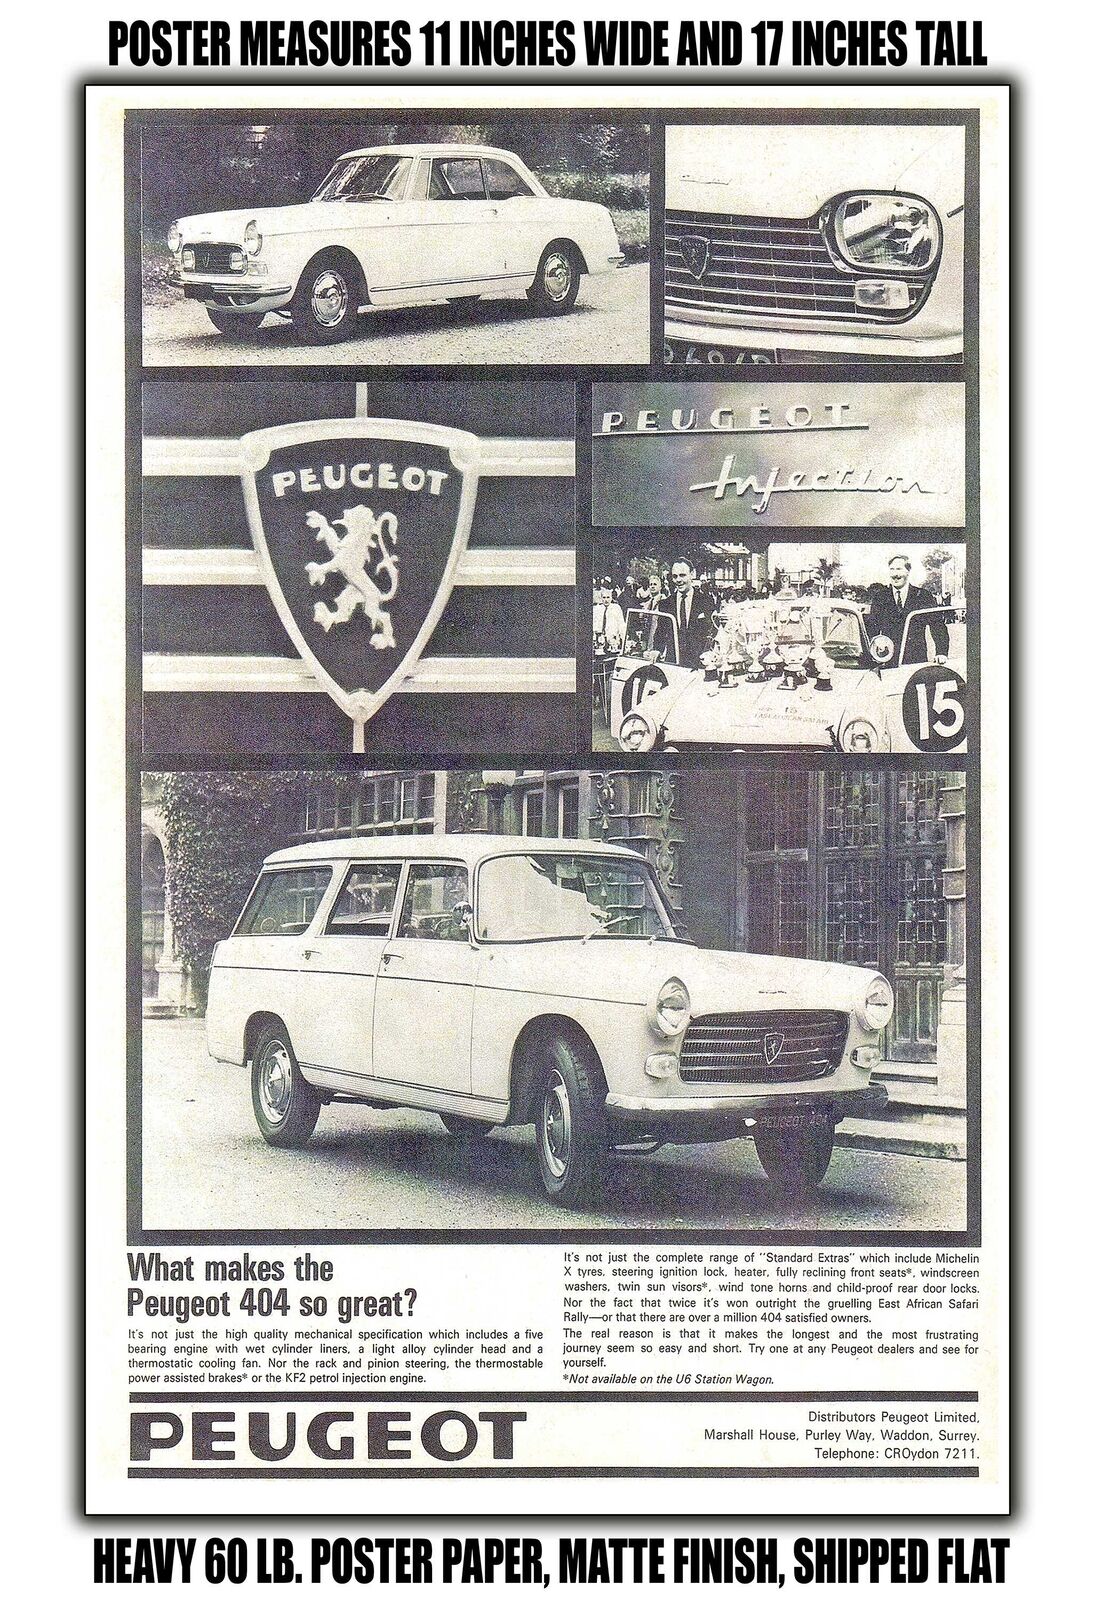 11x17 POSTER - 1967 Peugeot 404 What Makes the Peugeot 404 So Great